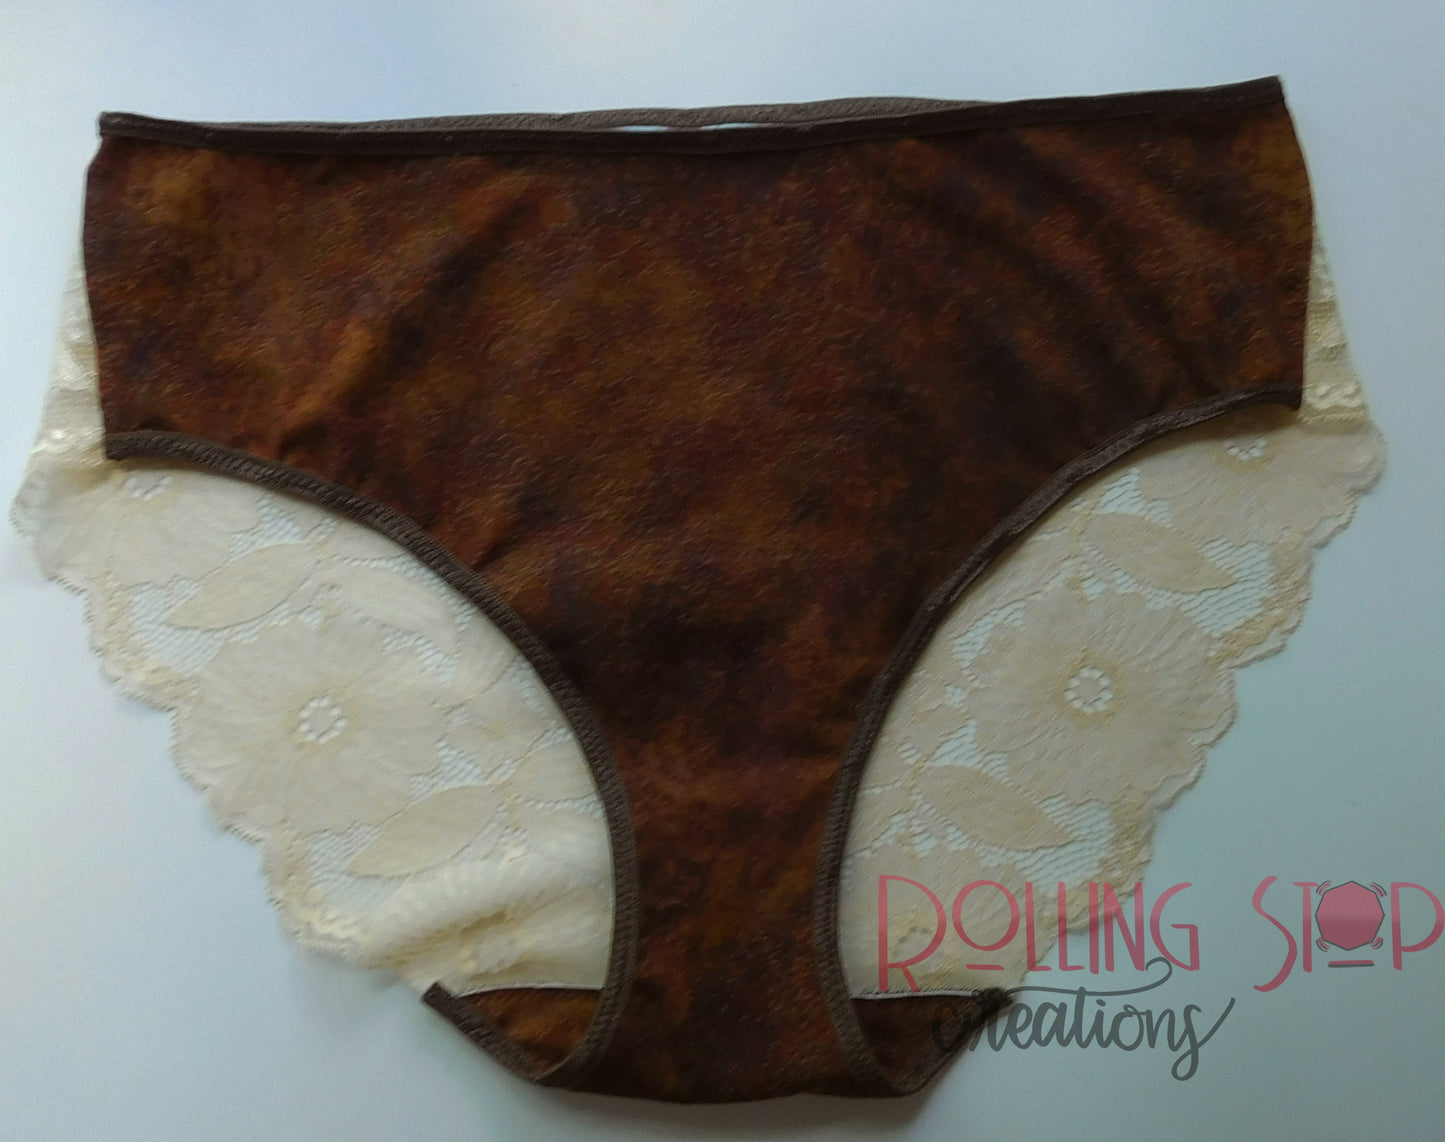 Gloomy Floral Lace Back Pantydrawls by Rolling Stop Creations sold by Rolling Stop Creations 